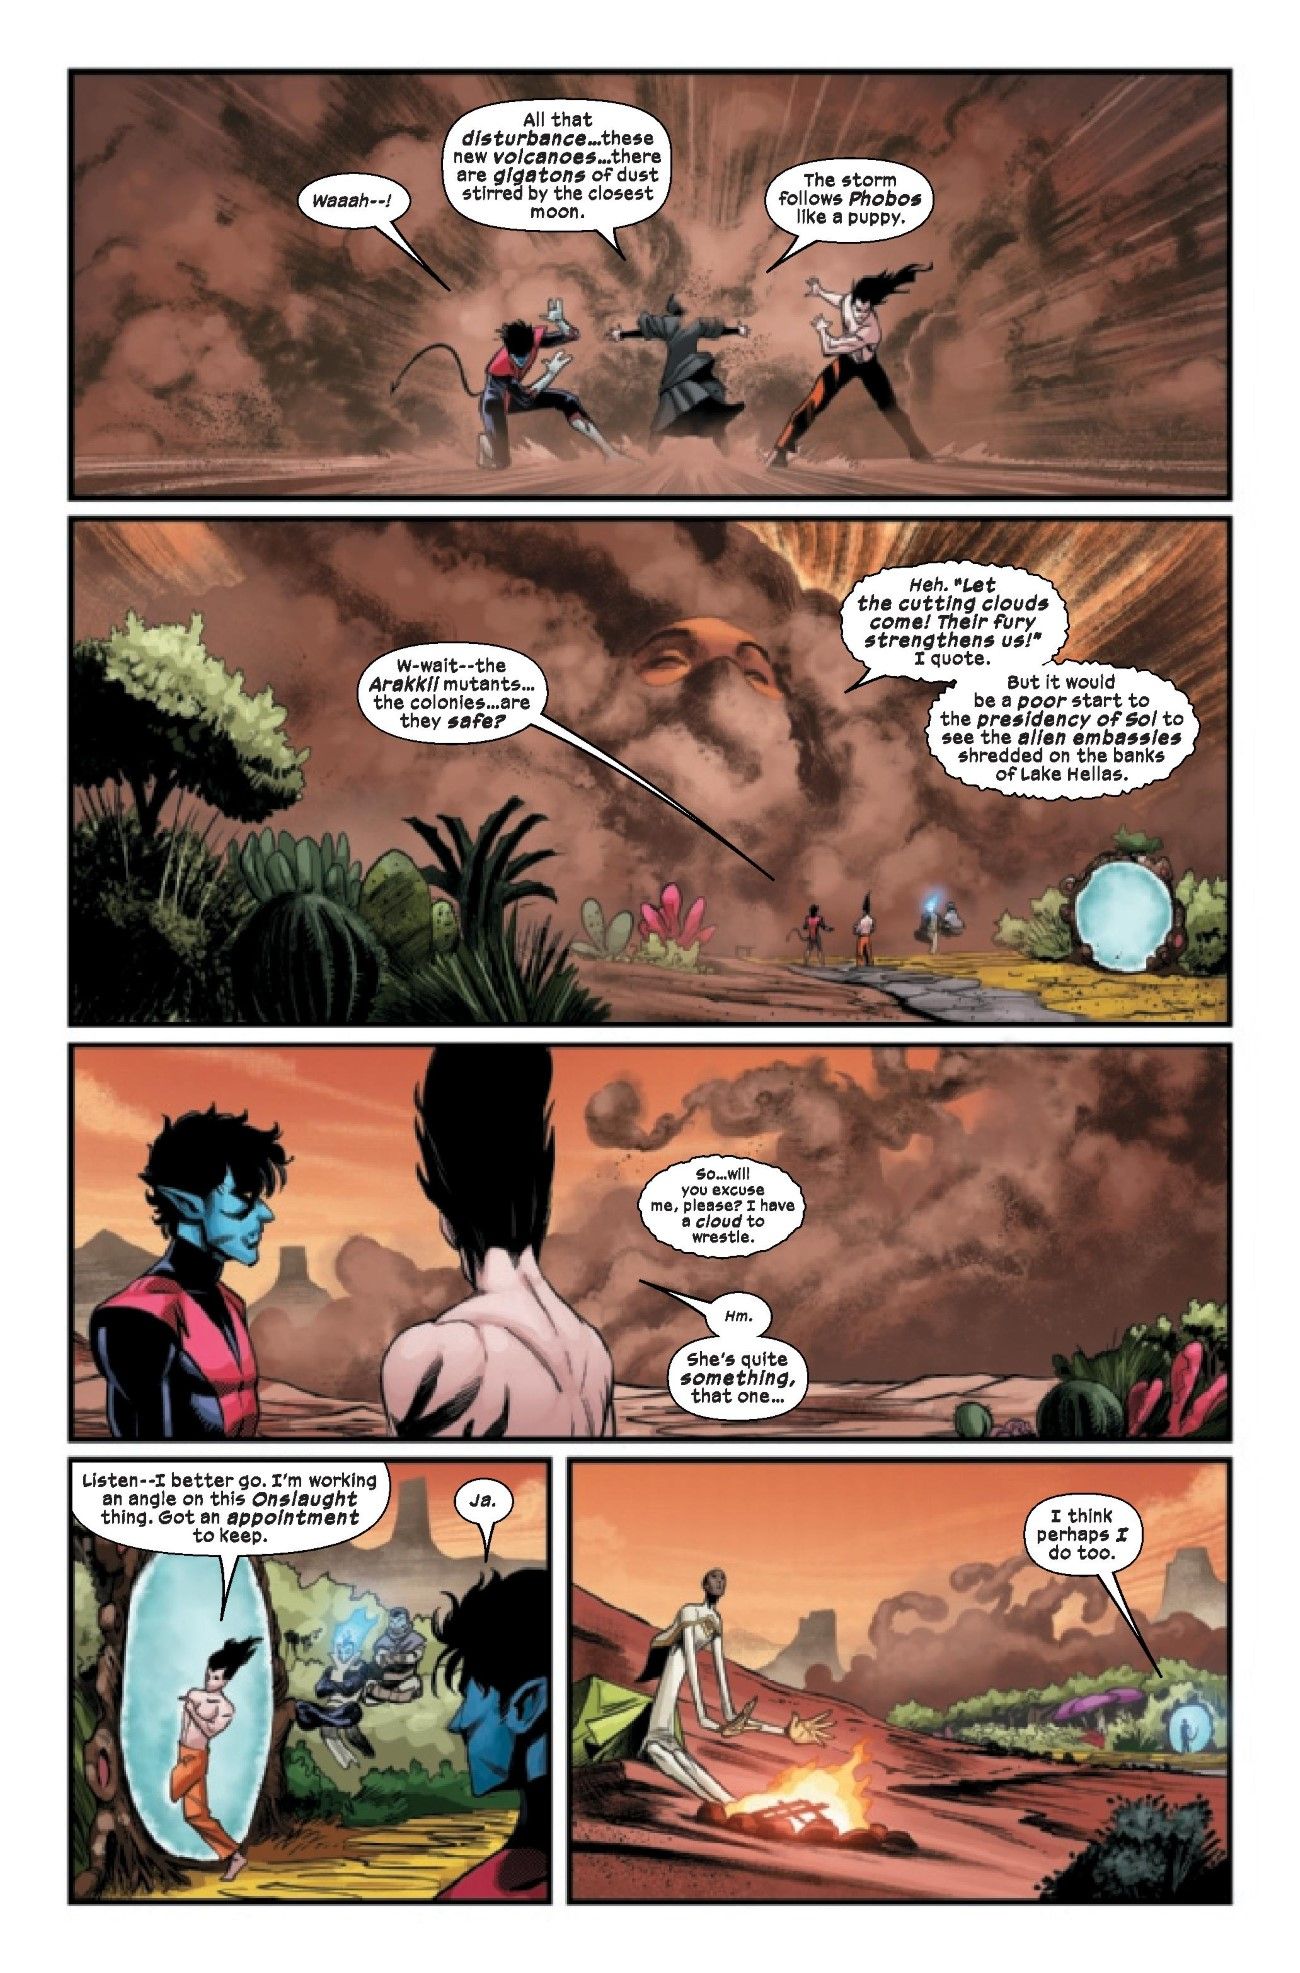 Way of X 4 Preview Page 2